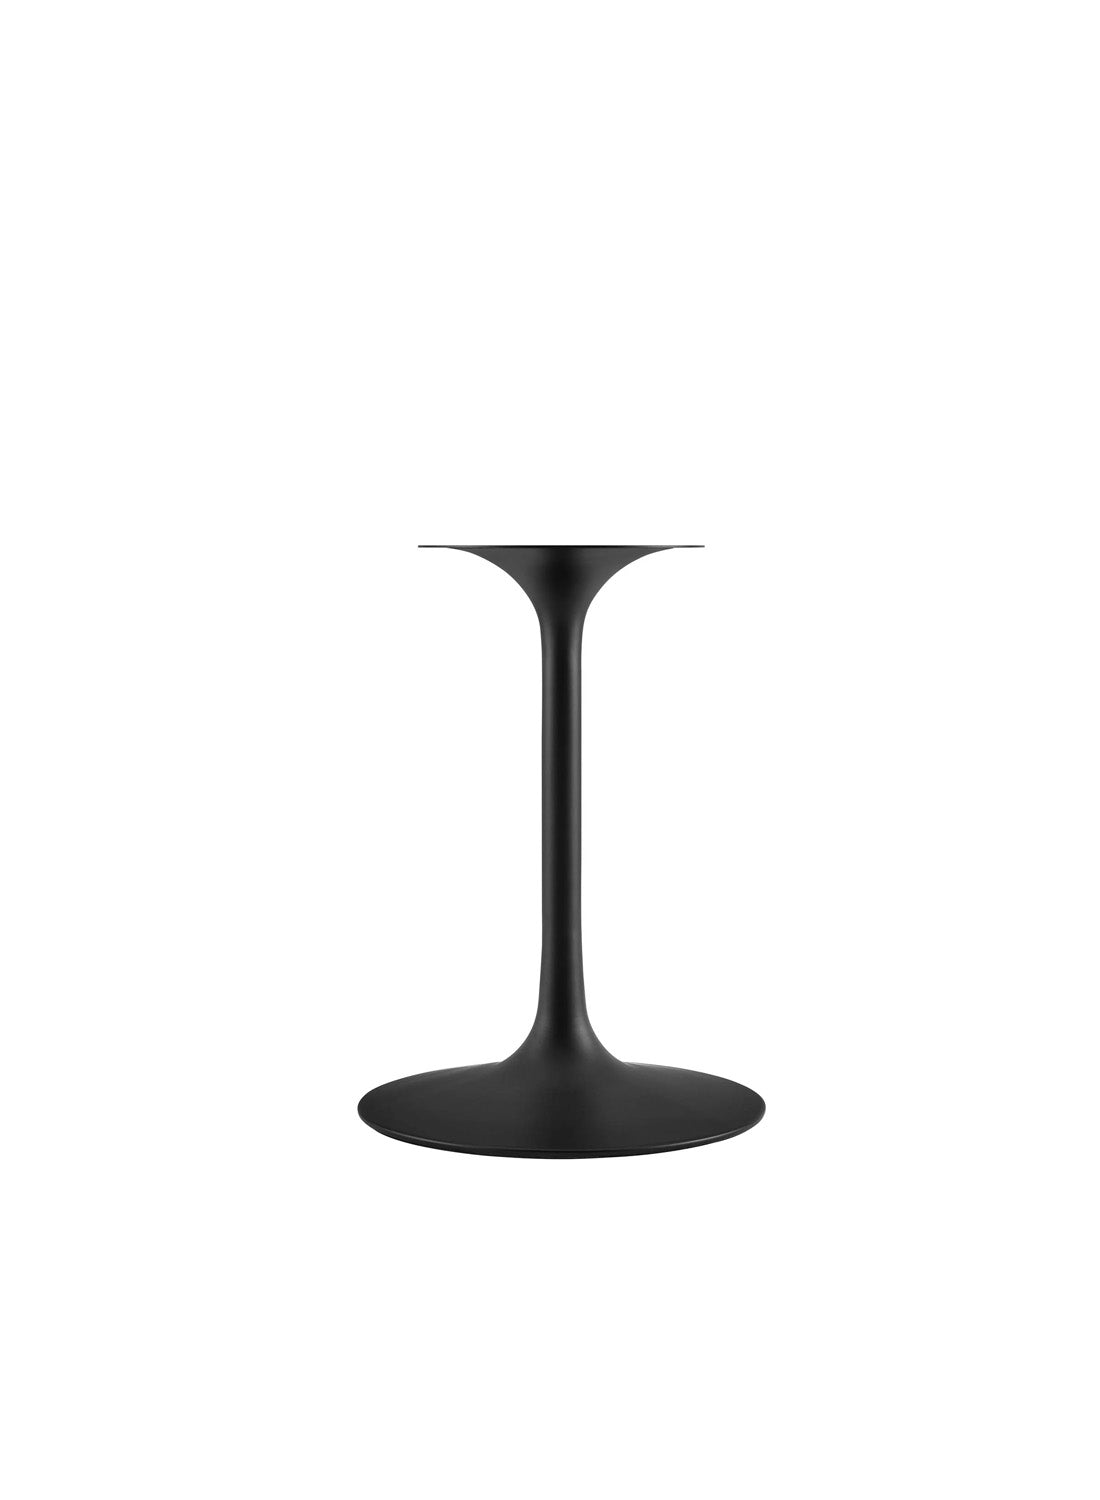 Lily 28" Round White Dining Table, black base